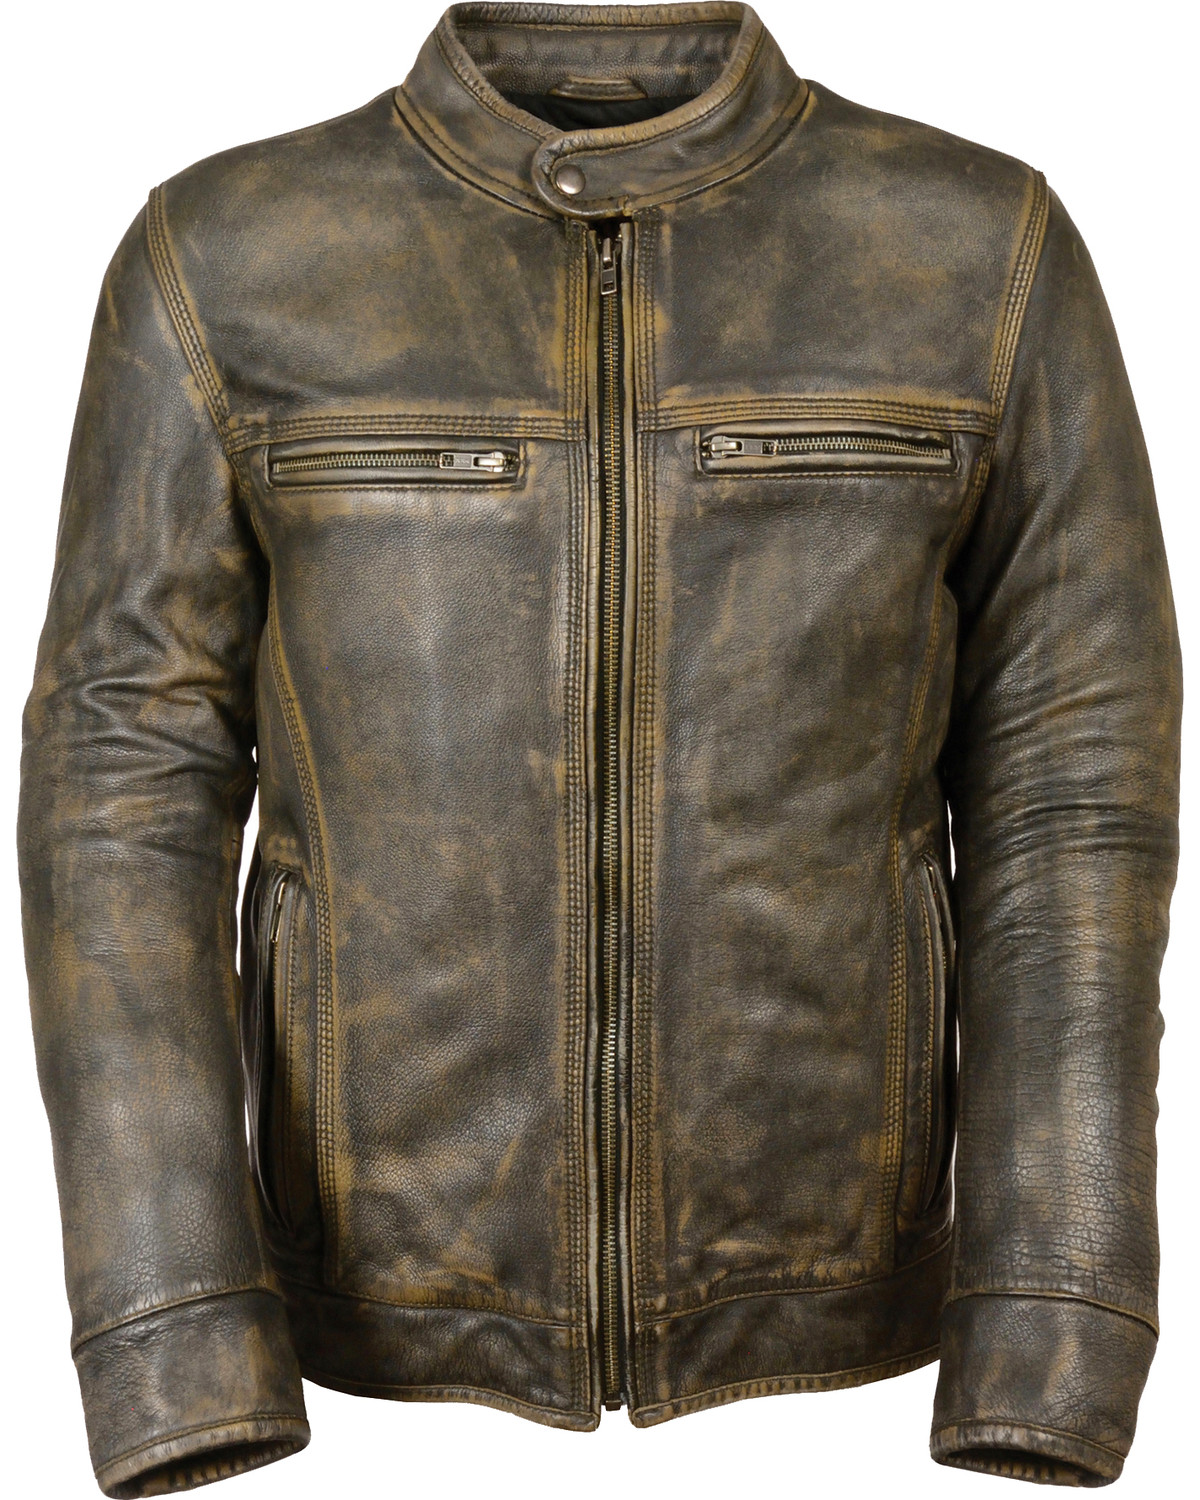 Milwaukee Leather Men's Distressed Scooter Jacket w/ Venting